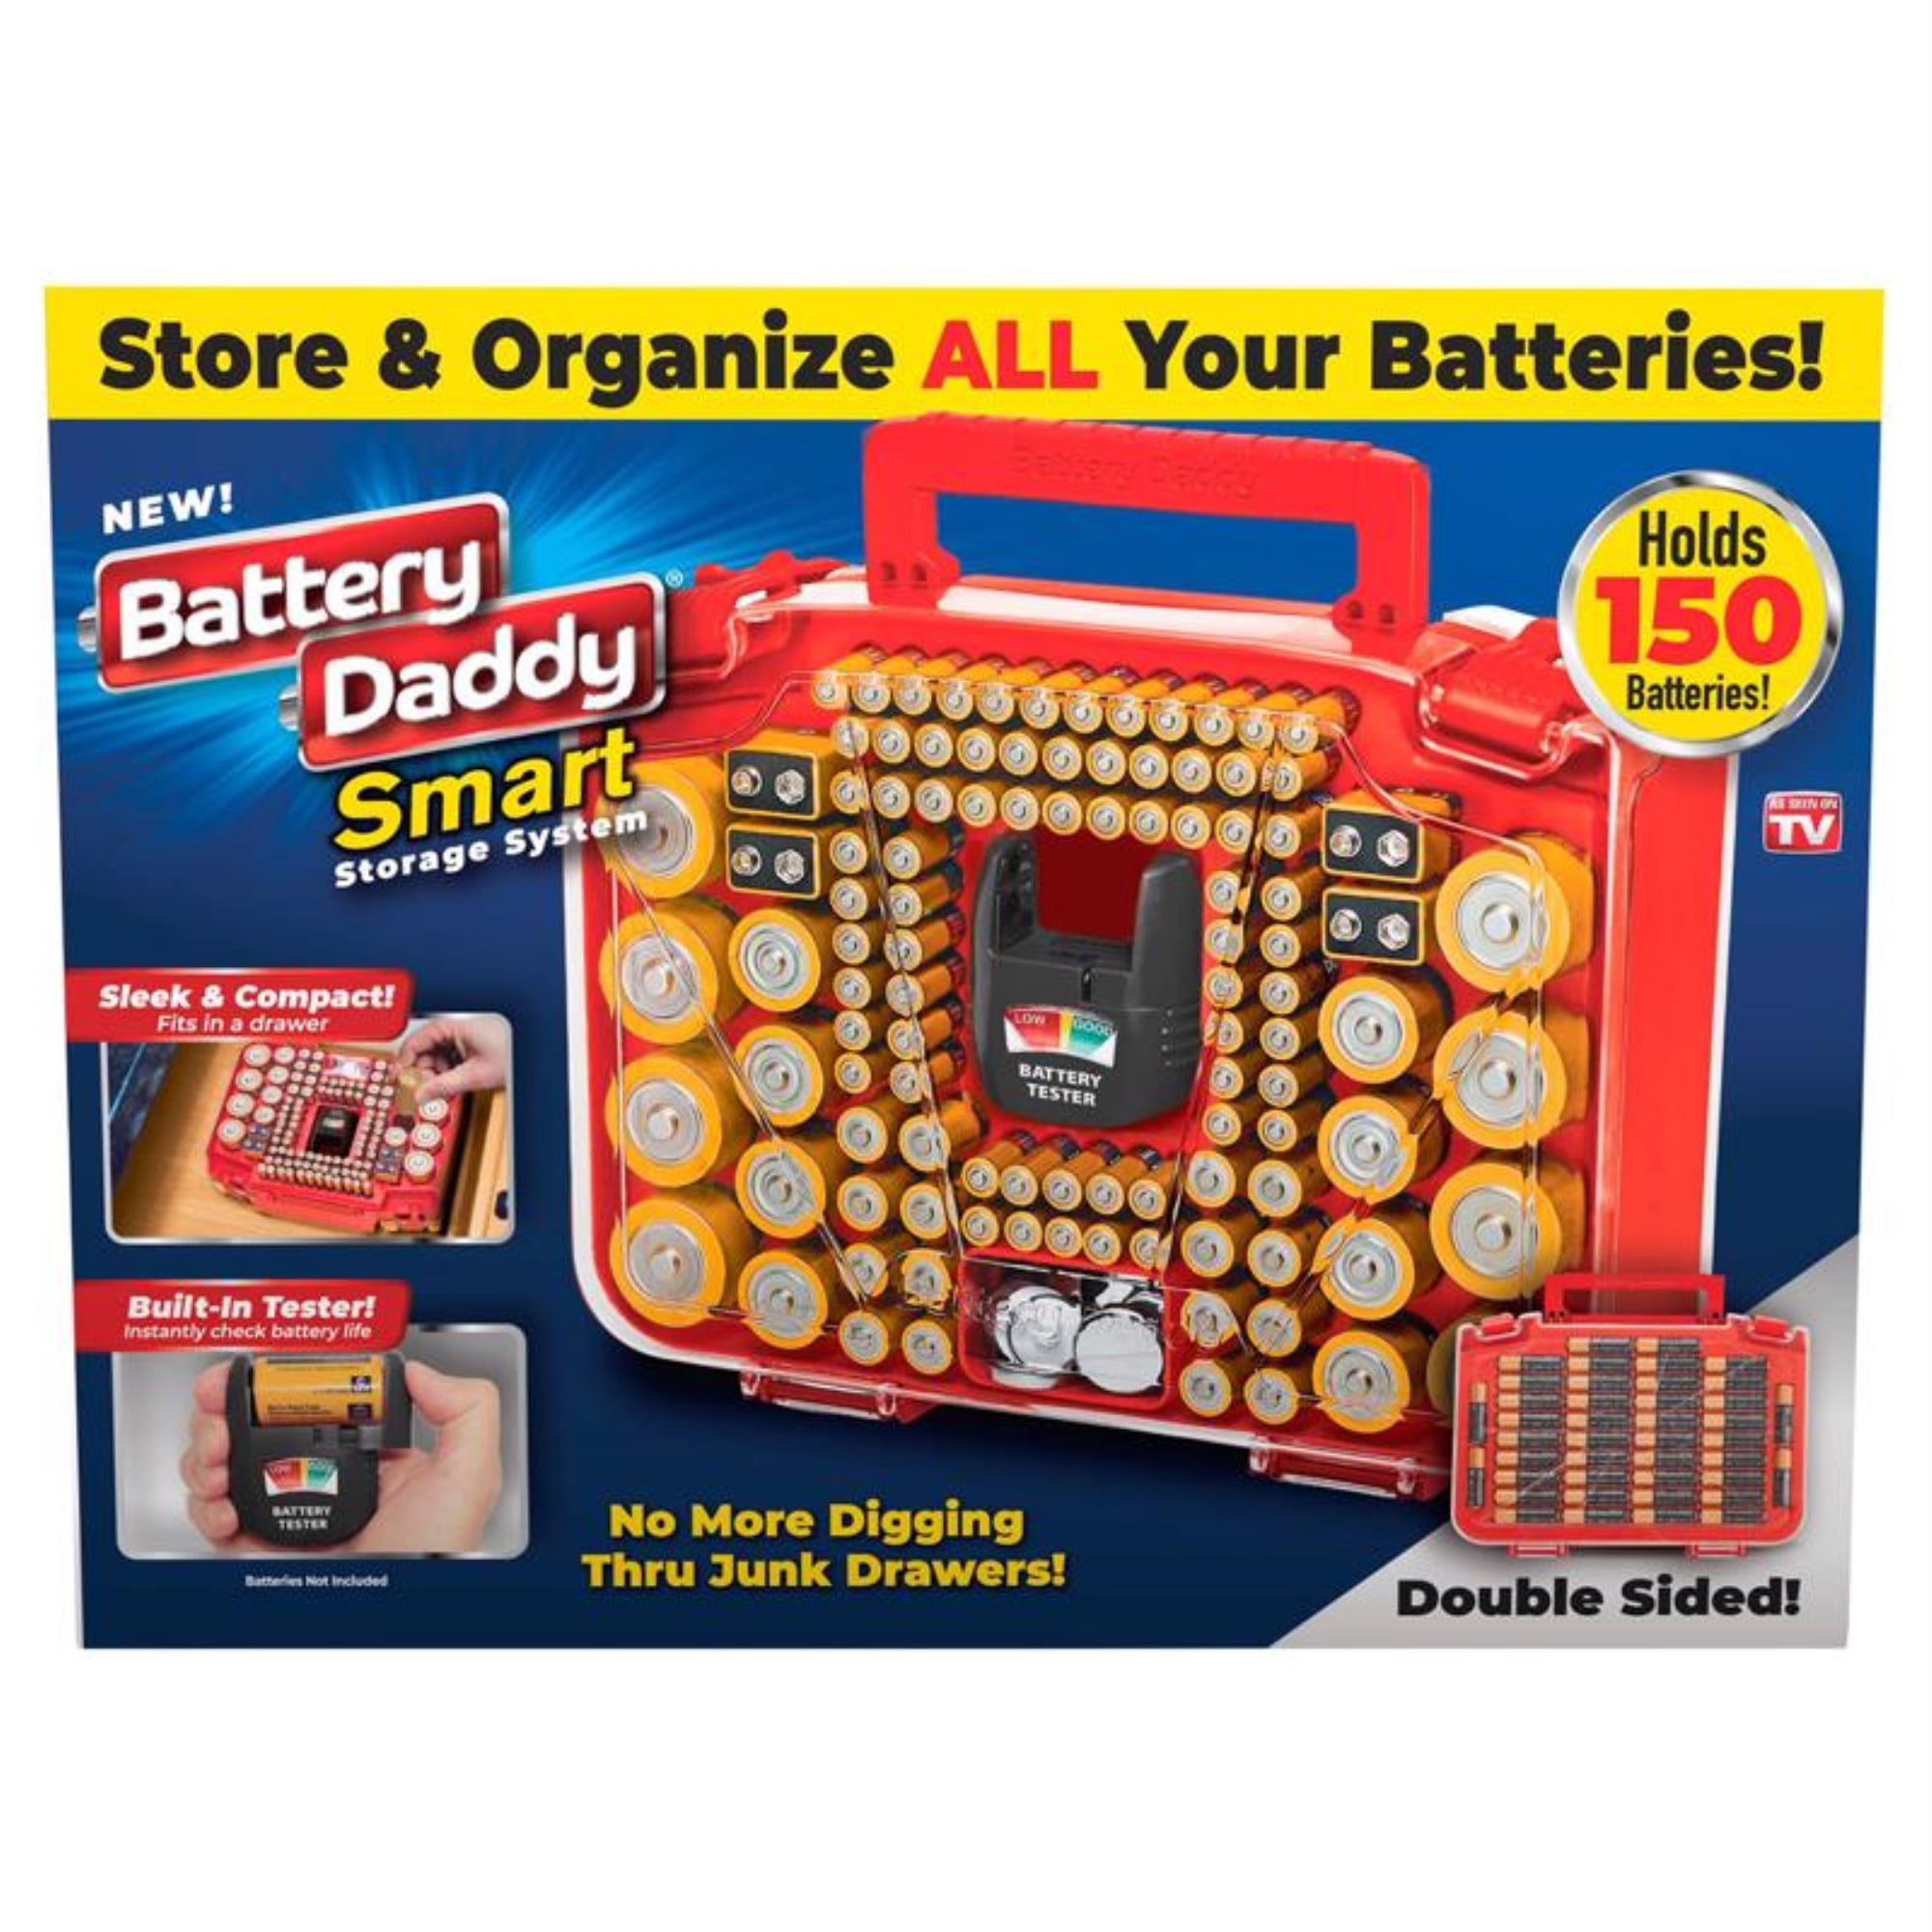 Smart Battery Daddy, Battery Storage System with Built in Battery